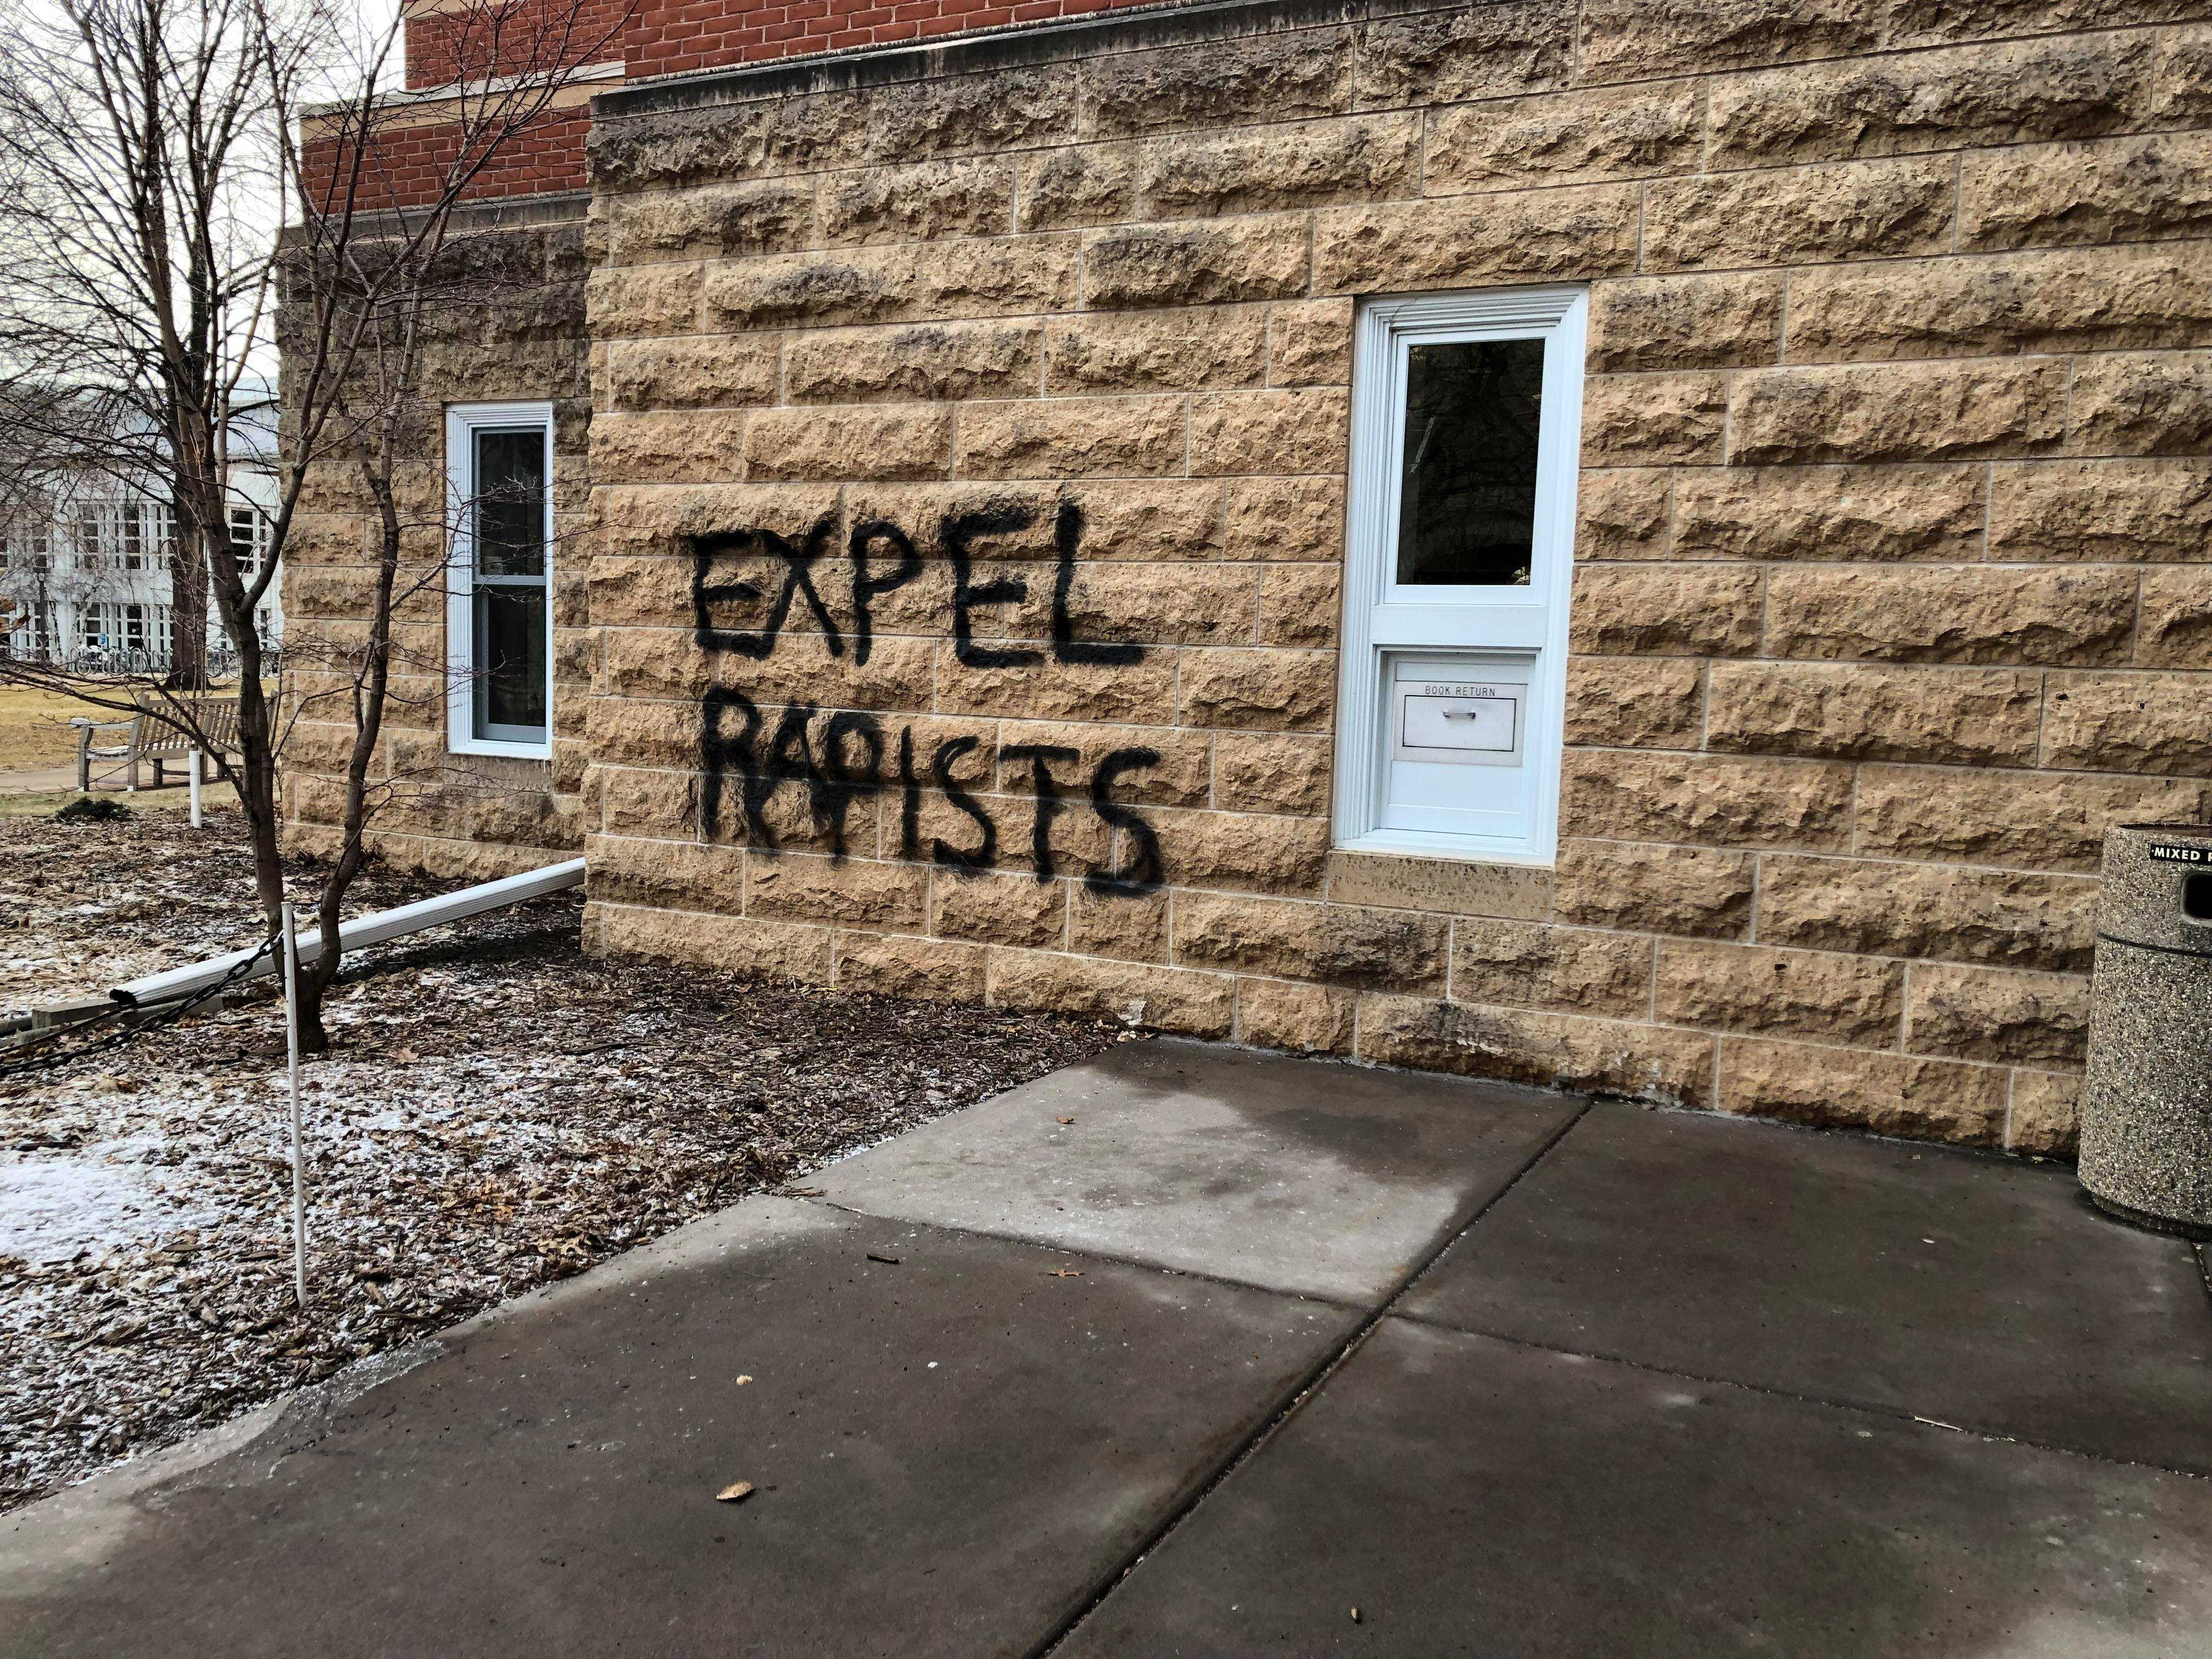 Sexual Violence Related Graffiti Found On Campus Buildings The Mac Weekly